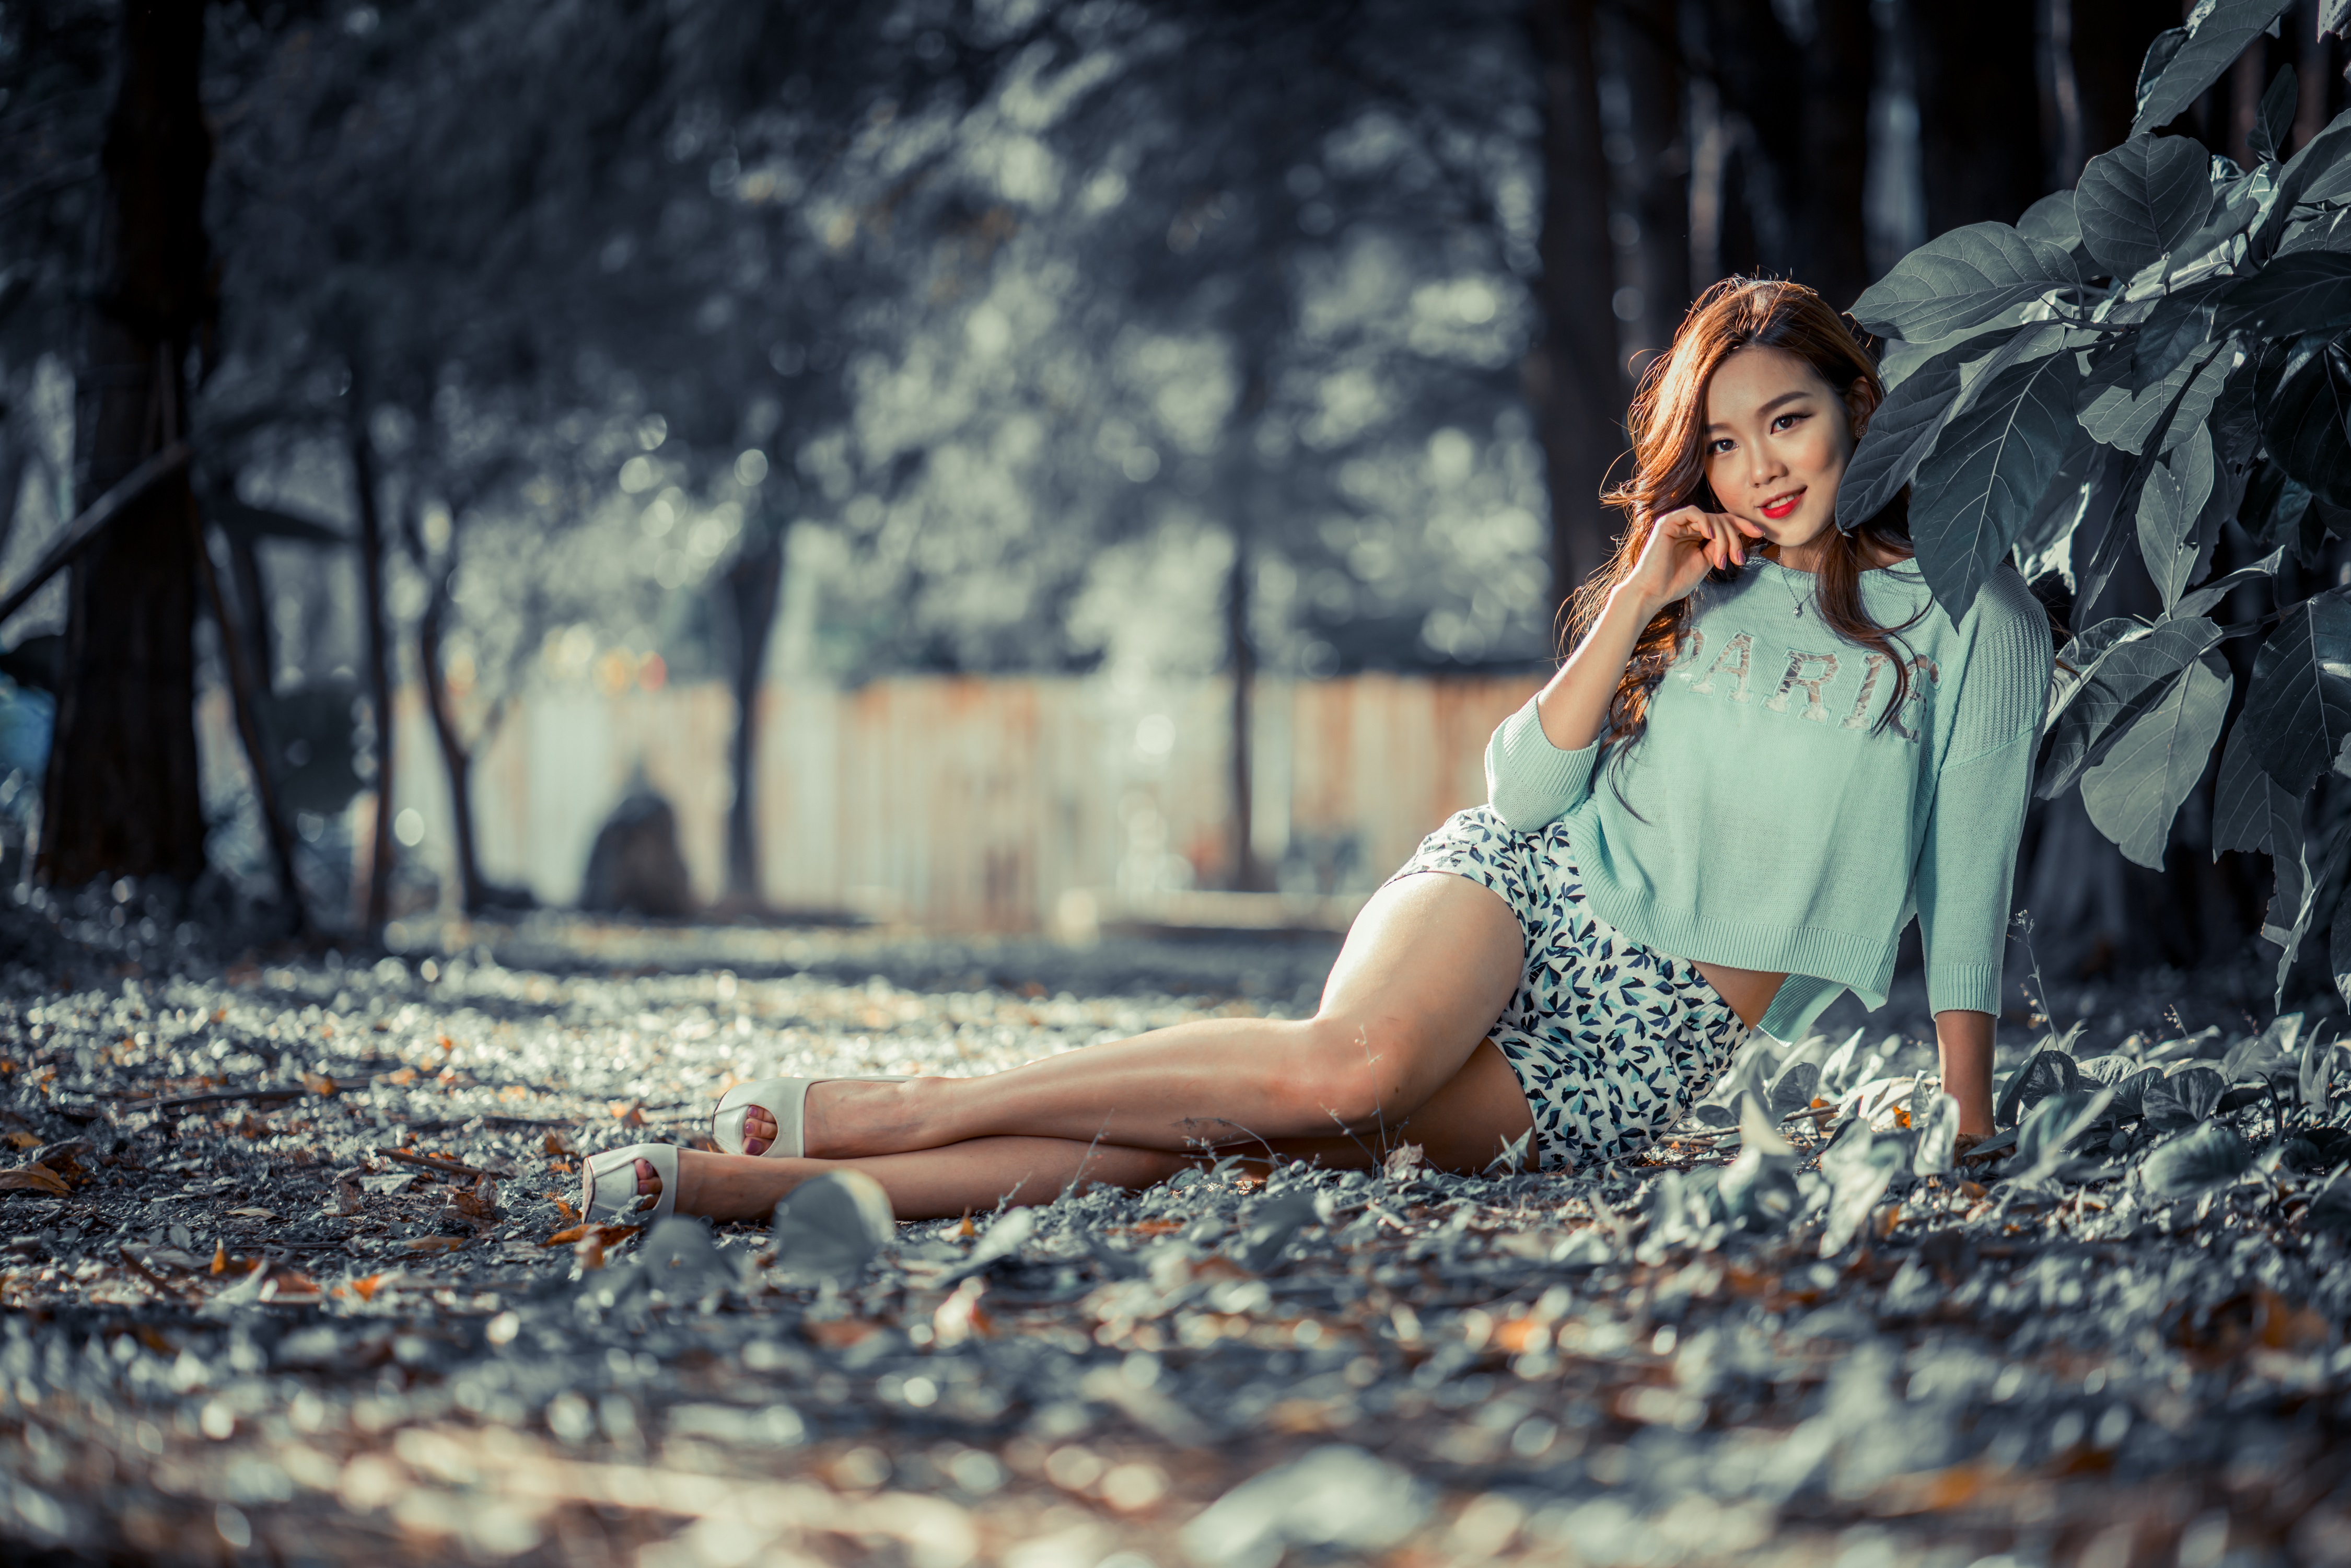 People 4500x3001 women model brunette Asian portrait outdoors looking at viewer smiling necklace sweater short shorts legs red lipstick women outdoors